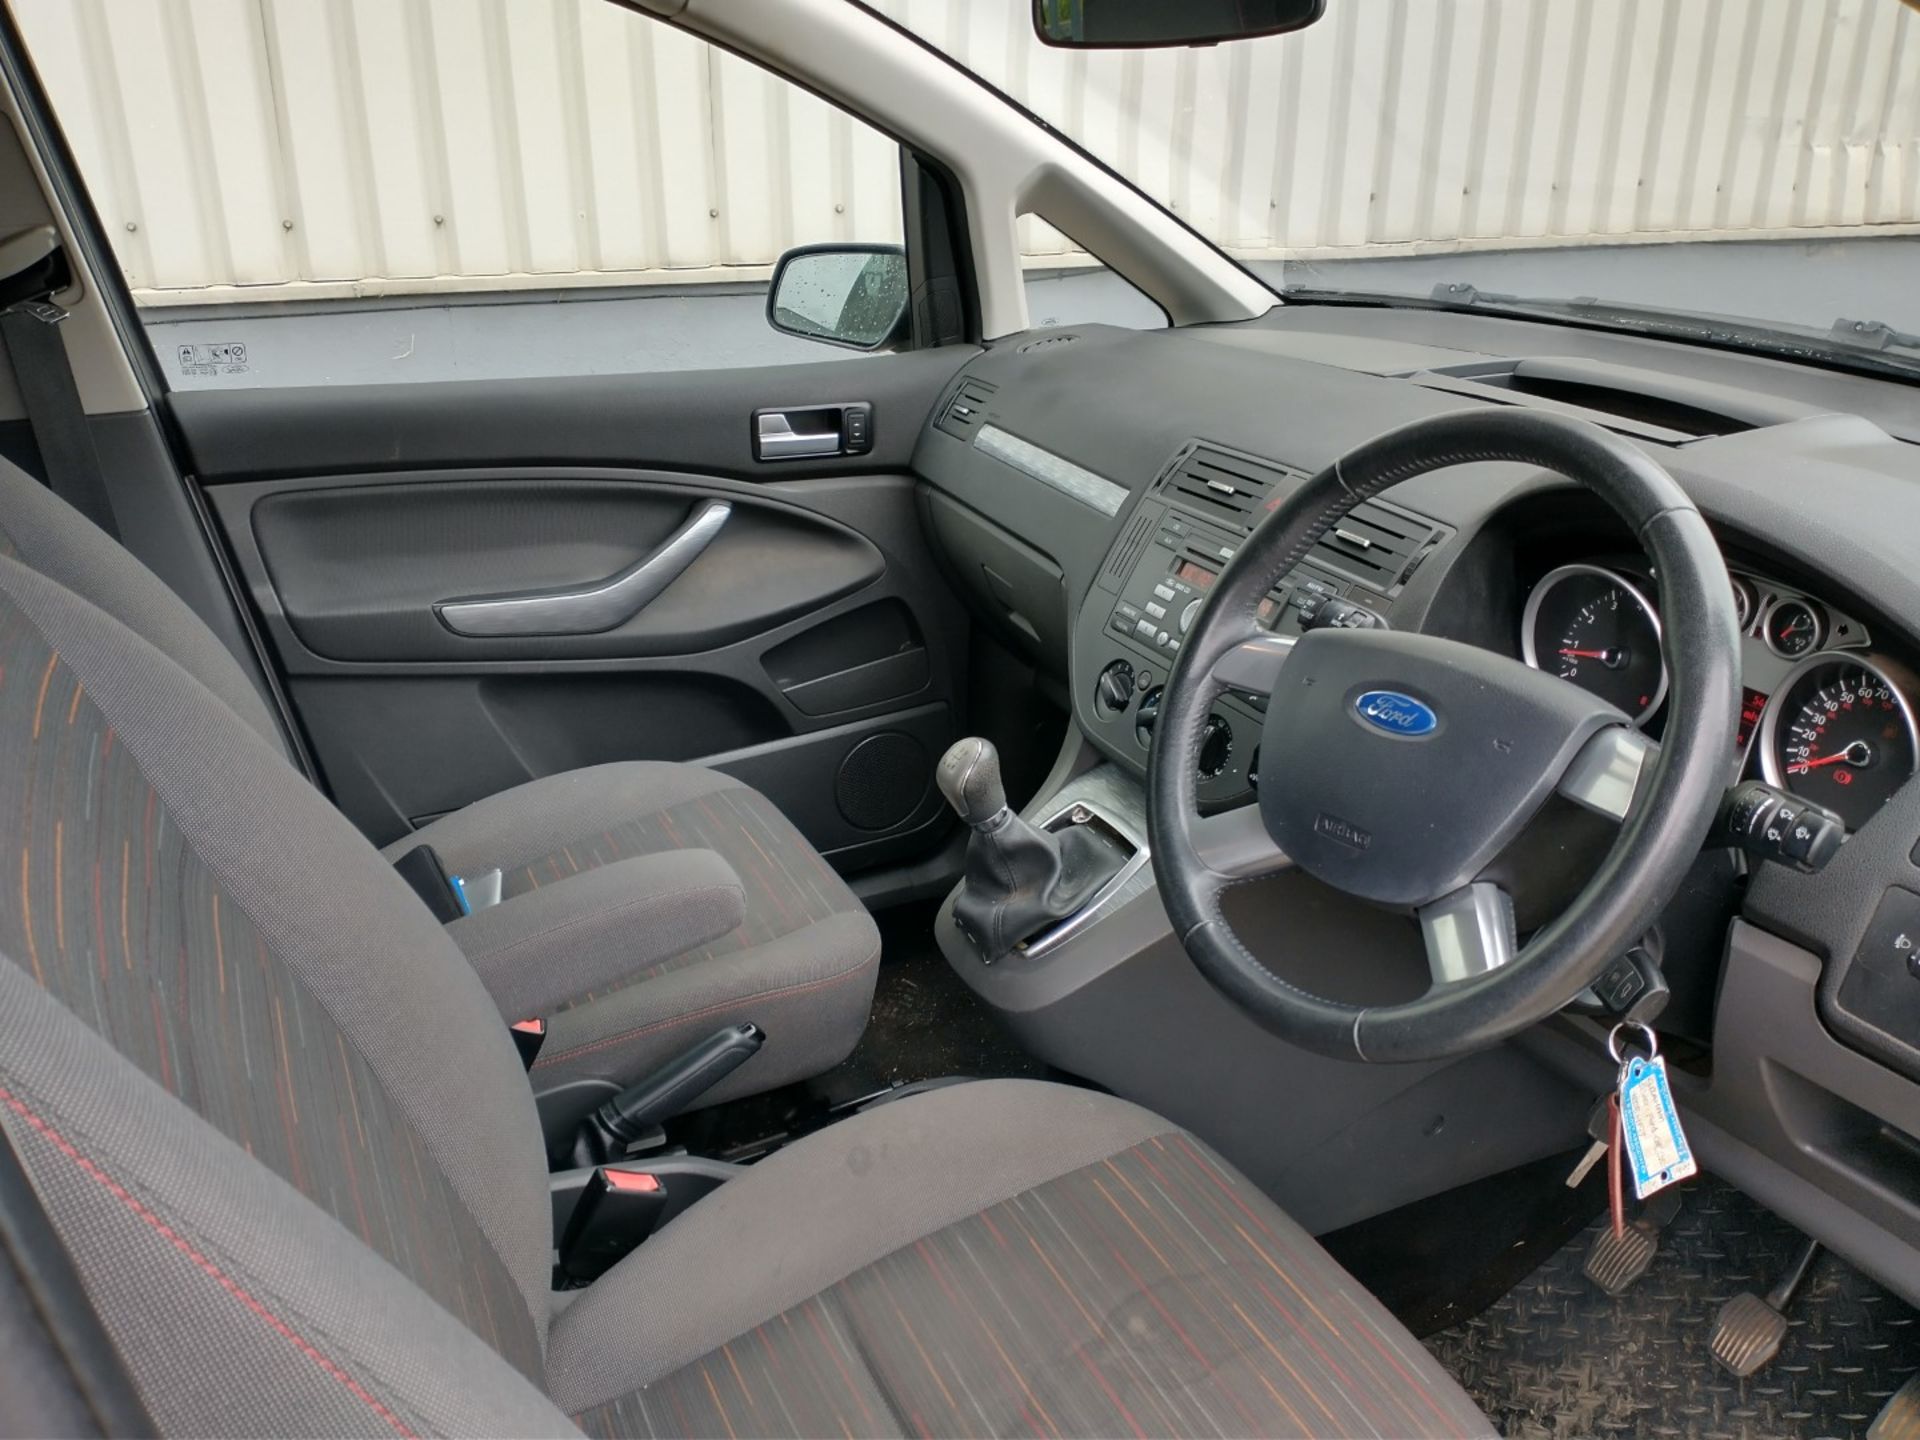 2008 Ford C-Max Zetec MPV 5dr 1.8 Petrol - CL505 - NO VAT ON THE HAMMER - Location: Corby - Image 2 of 17